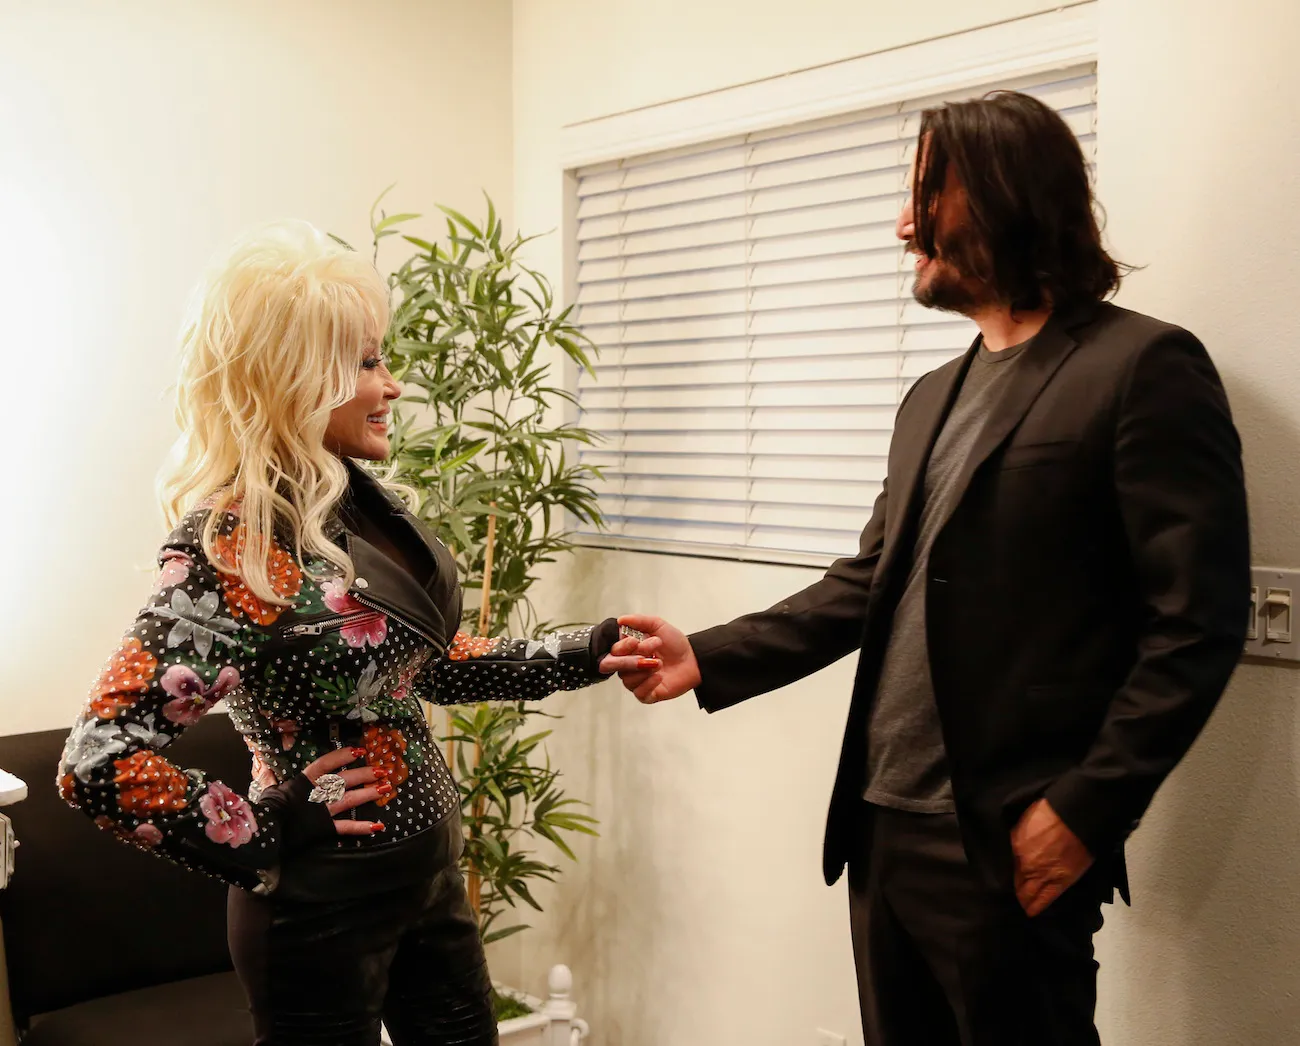 Dolly Parton and Keanu Reeves